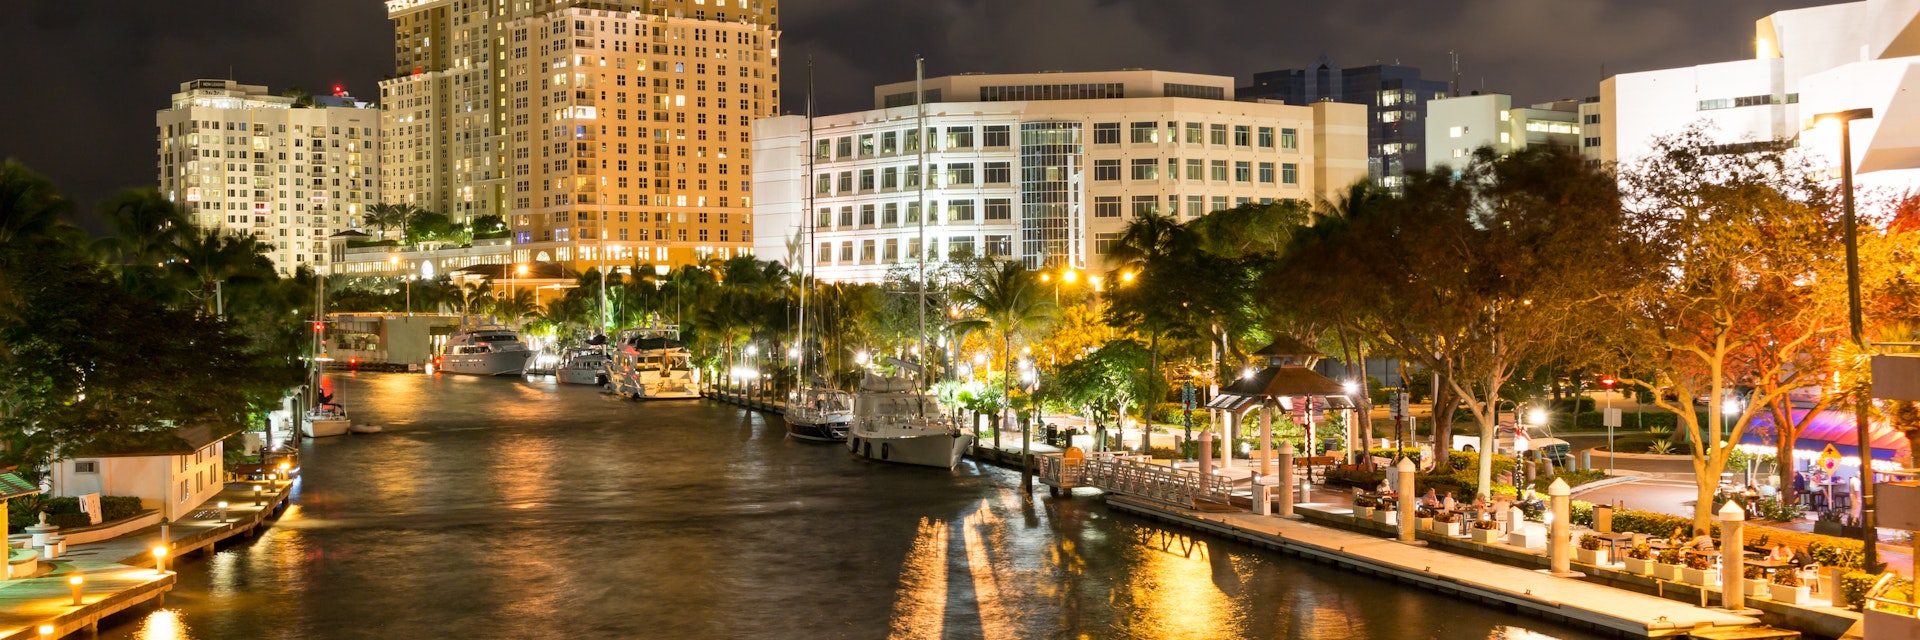 FORT LAUDERDALE, USA - DEC 6, 2015: Night view of New River with Riverwalk promenade highrise condominium buildings and yachts in Fort Lauderdale, Florida; Shutterstock ID 355336061; Your name (First / Last): Lauren Keith; GL account no.: 65050; Netsuite department name: Content Asset; Full Product or Project name including edition: Guides Project Eastern USA